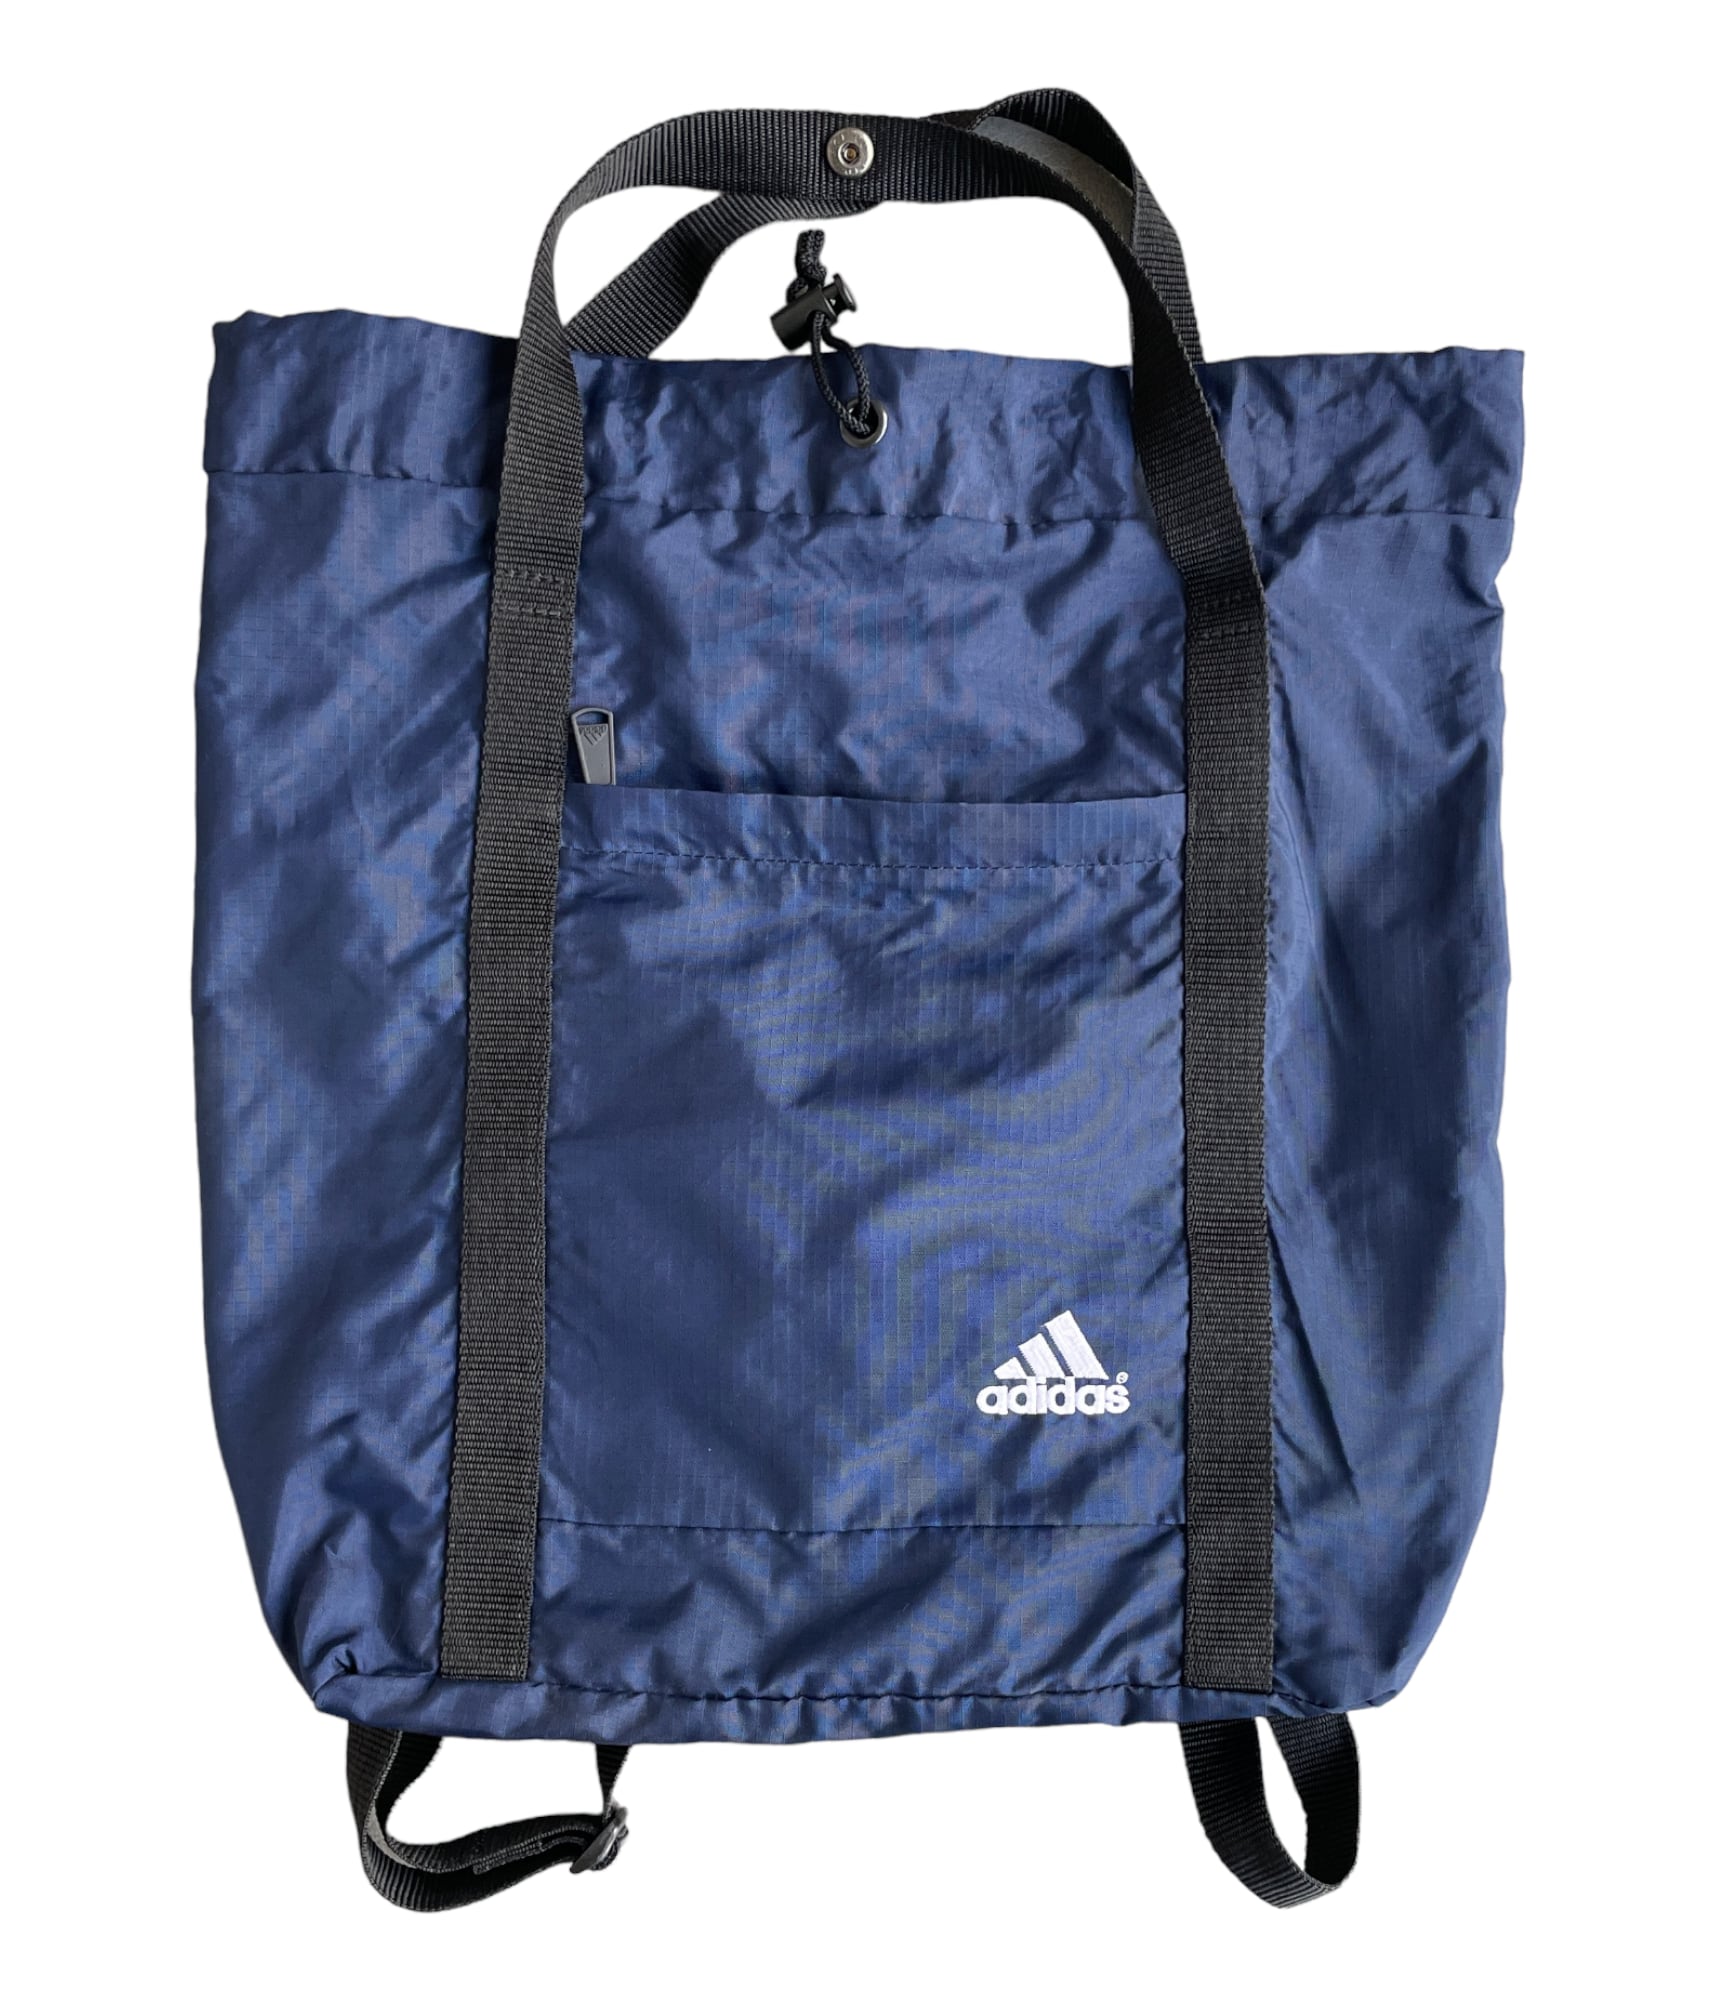 Vintage 90~00's backpack -adidas- | BEGGARS BANQUET公式通販サイト 古着・ヴィンテージ